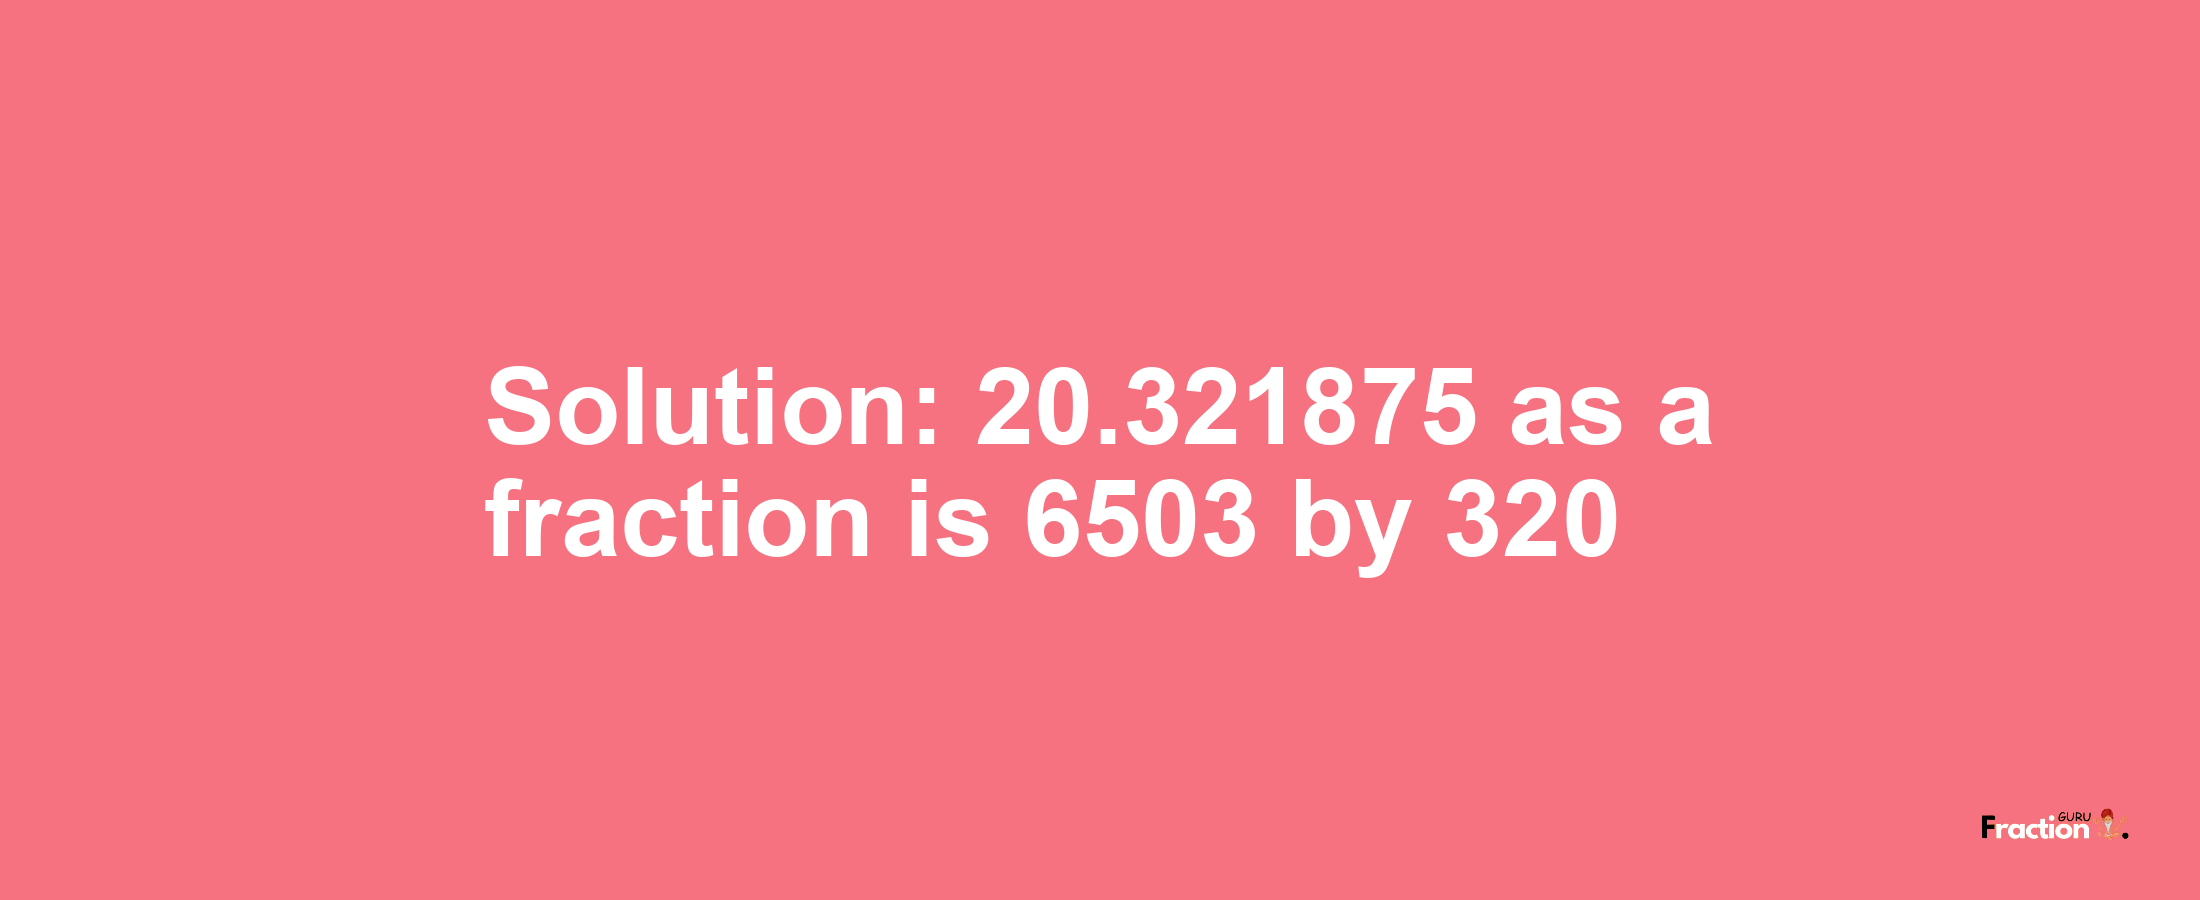 Solution:20.321875 as a fraction is 6503/320